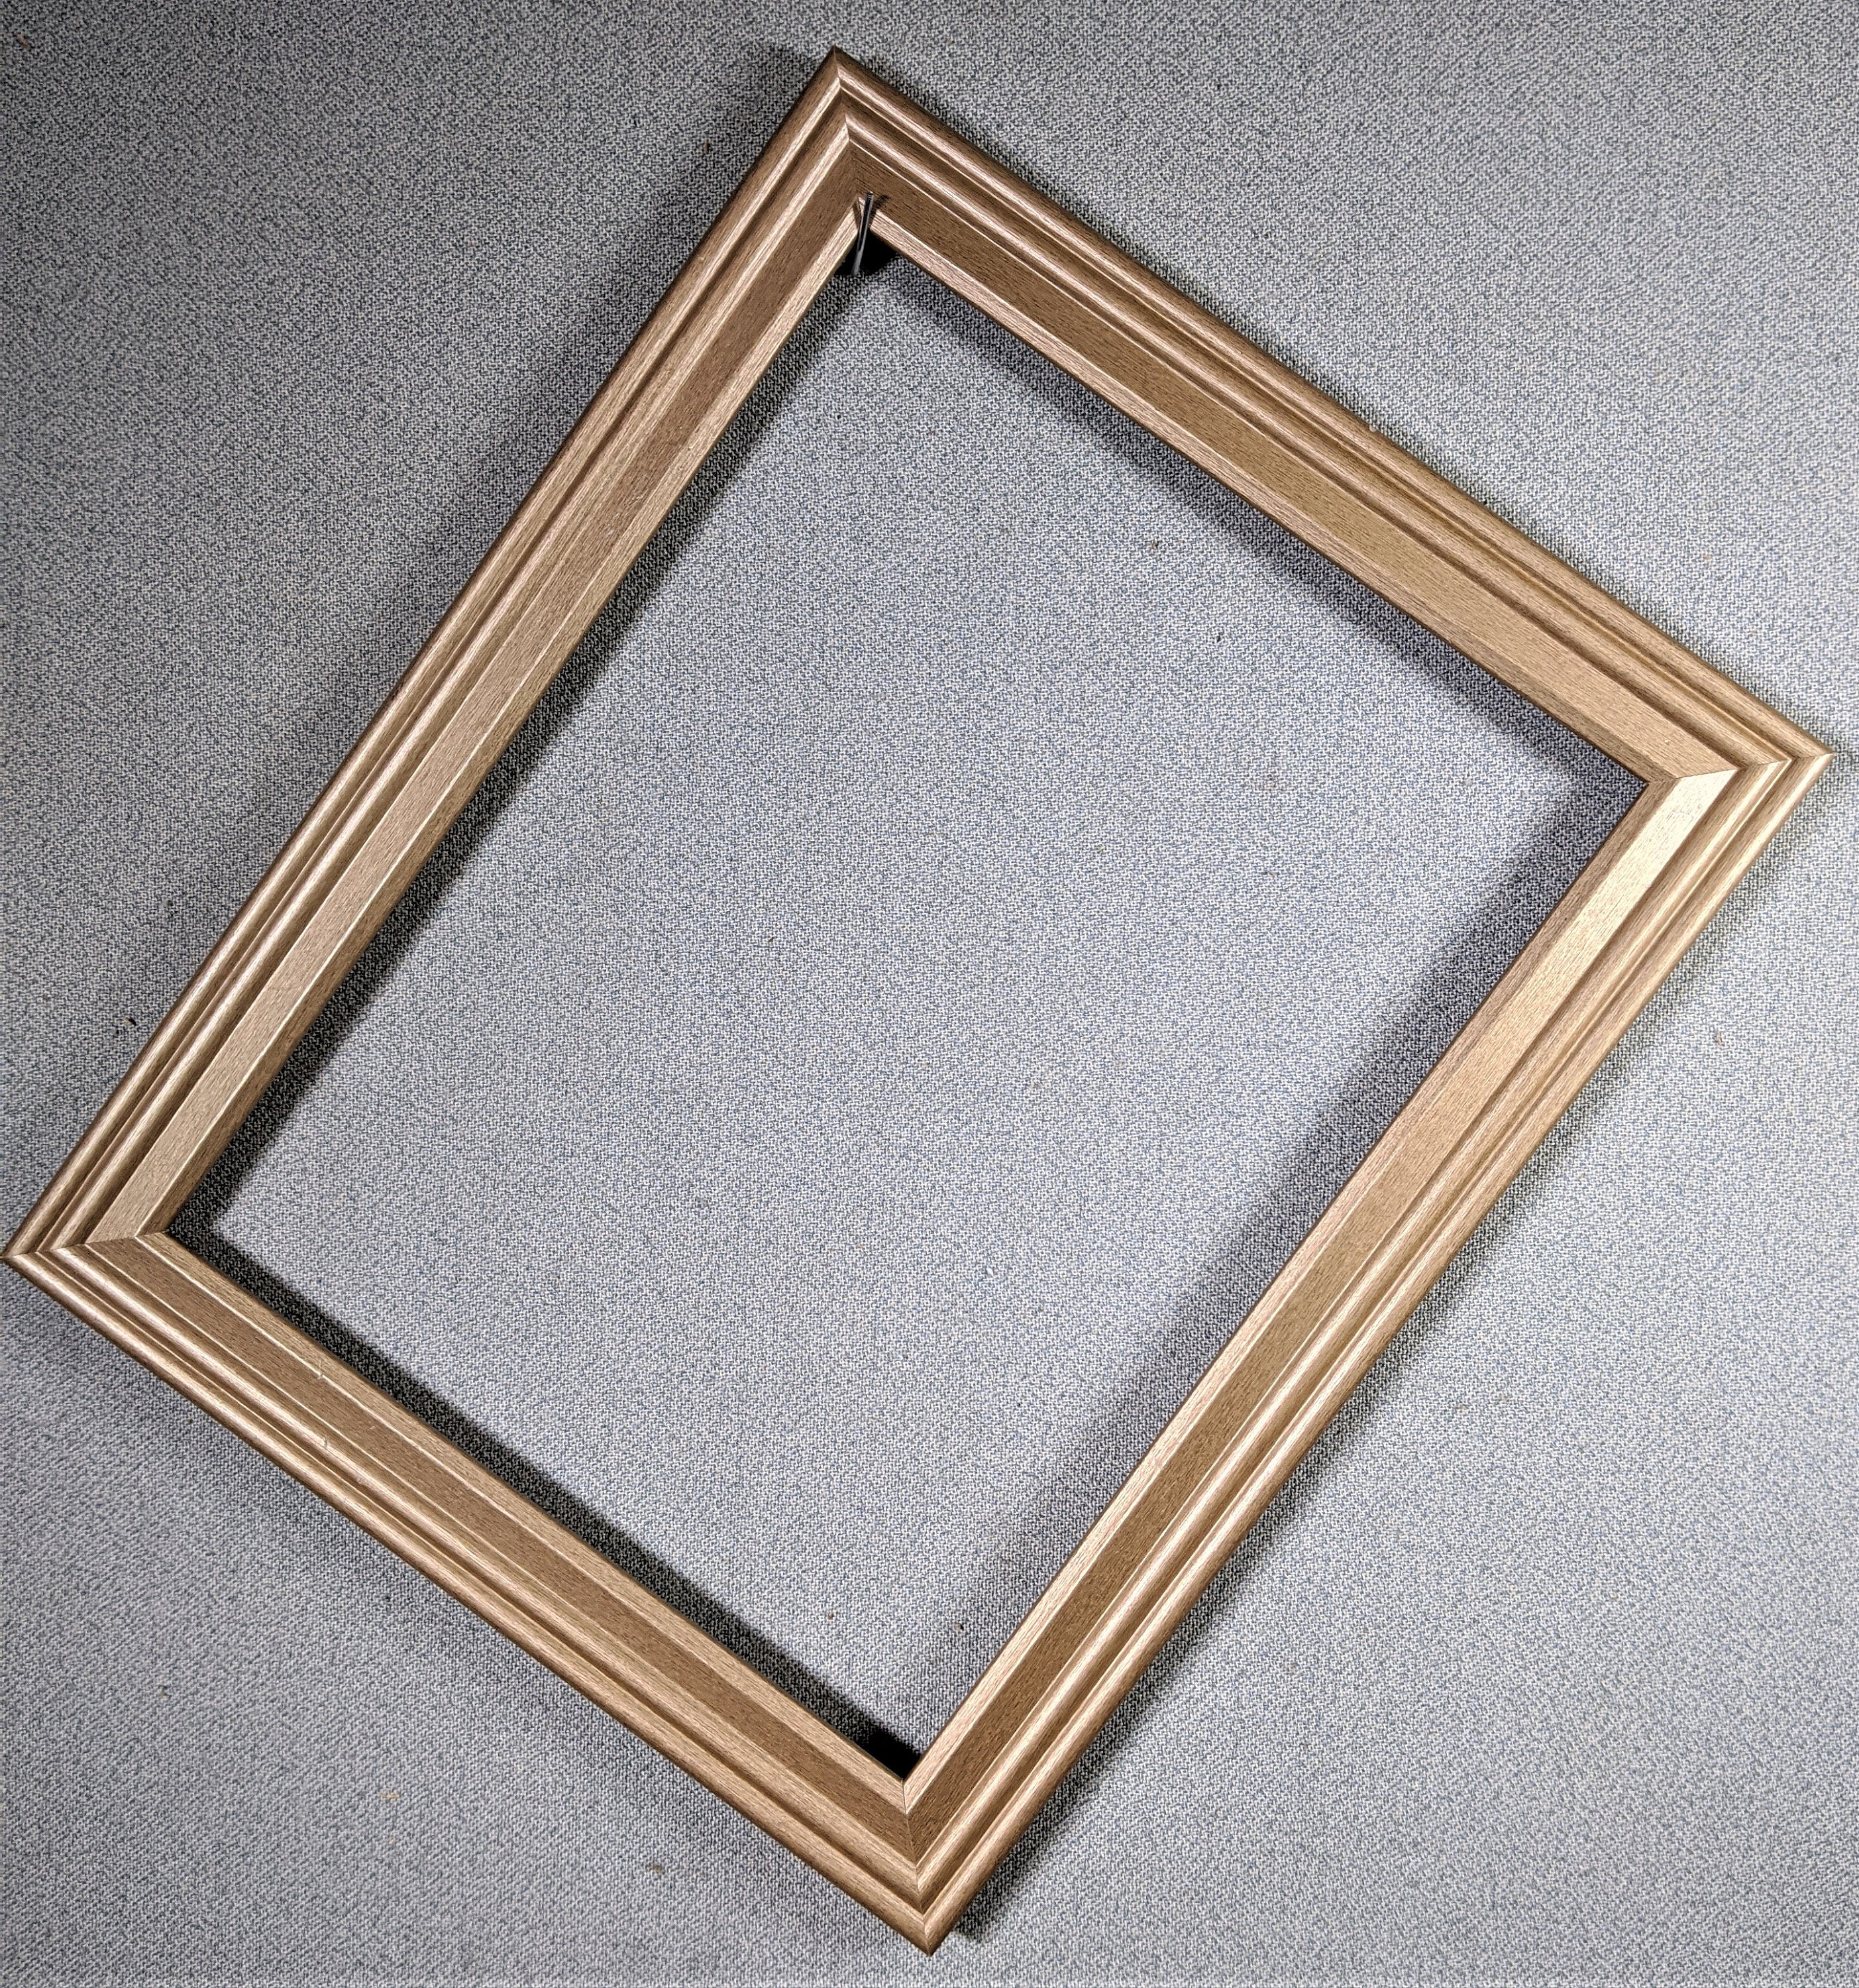 Green Bamboo Picture Frame Enamel Finish, 3x5, 4x6, 5x7, 8x10